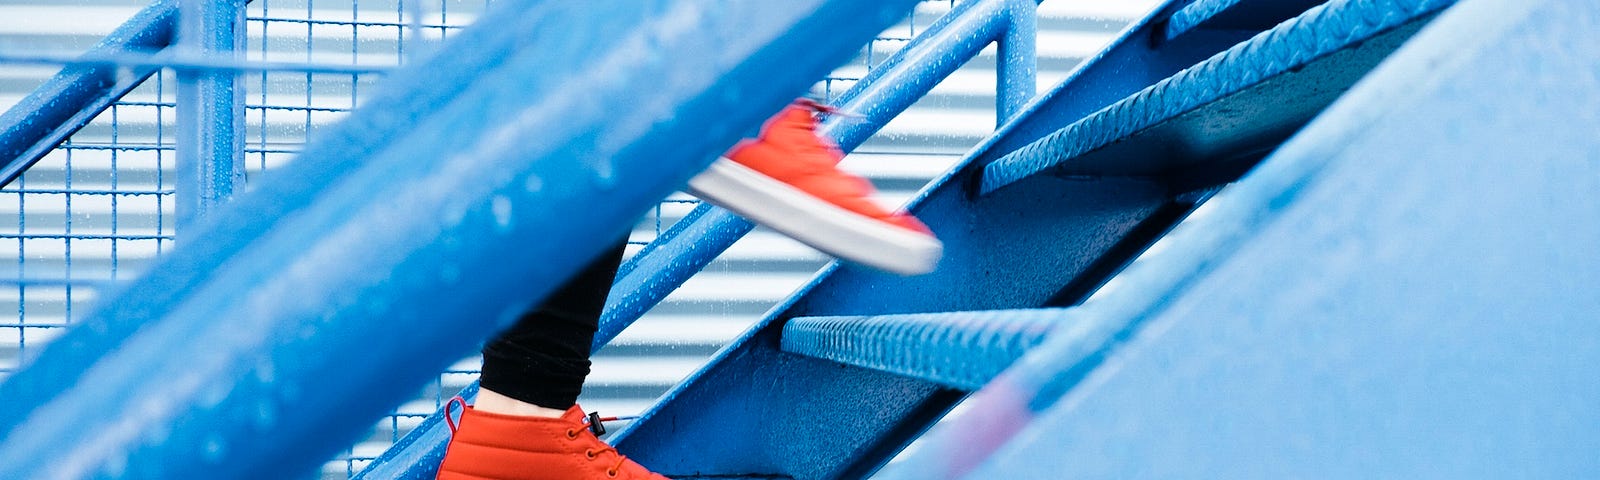 orange shoes are climbing blue stairs